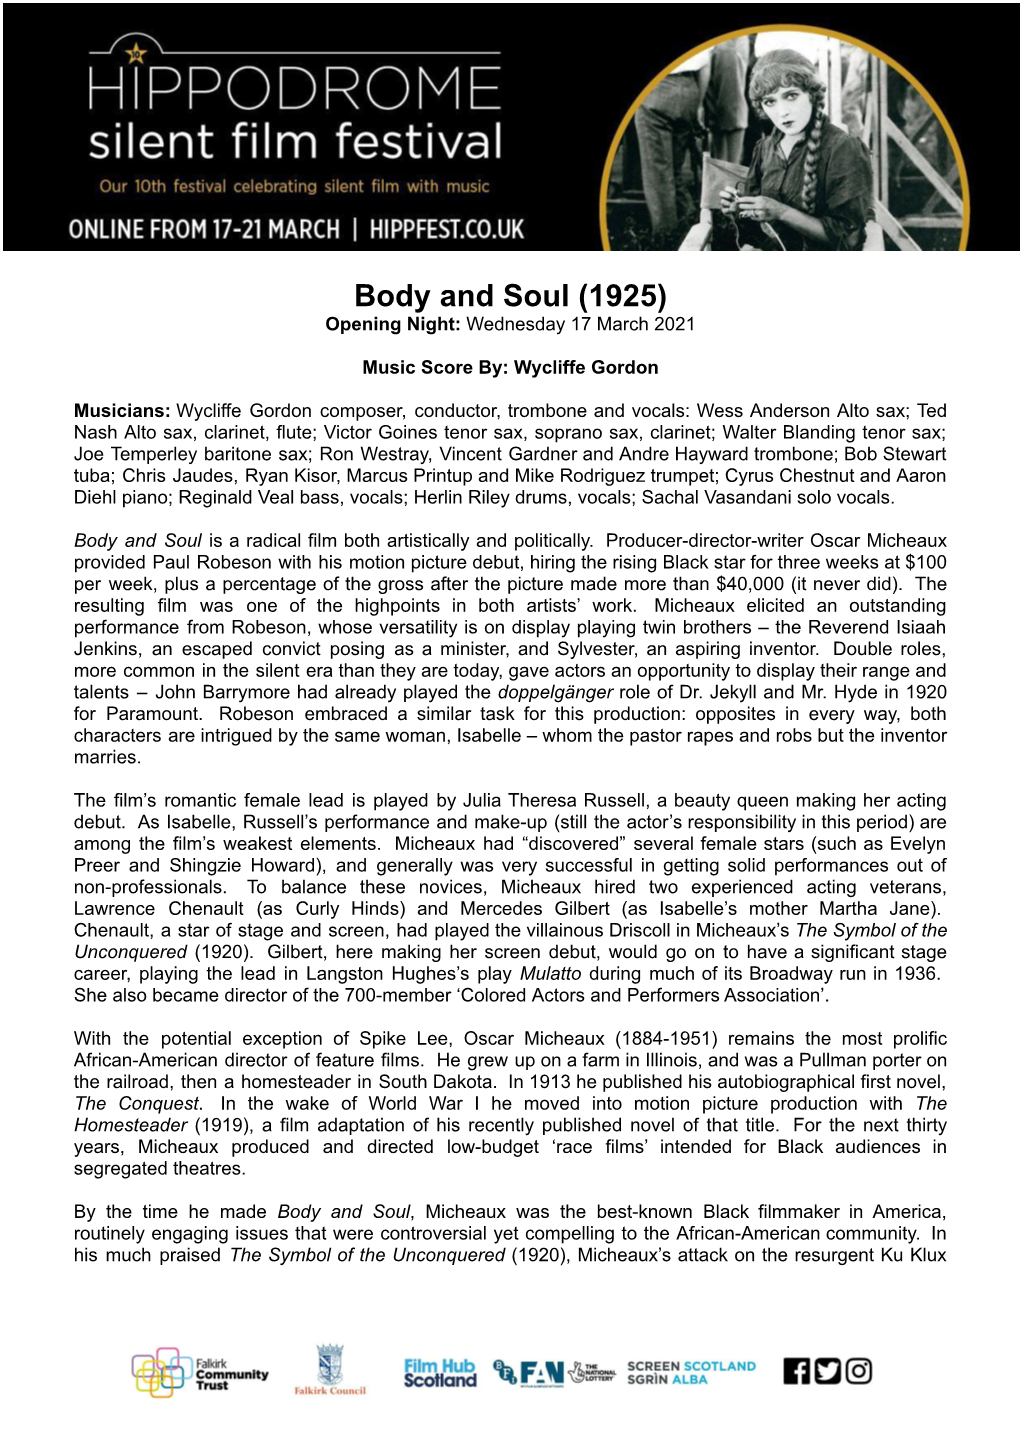 Body and Soul (1925) Opening Night: Wednesday 17 March 2021